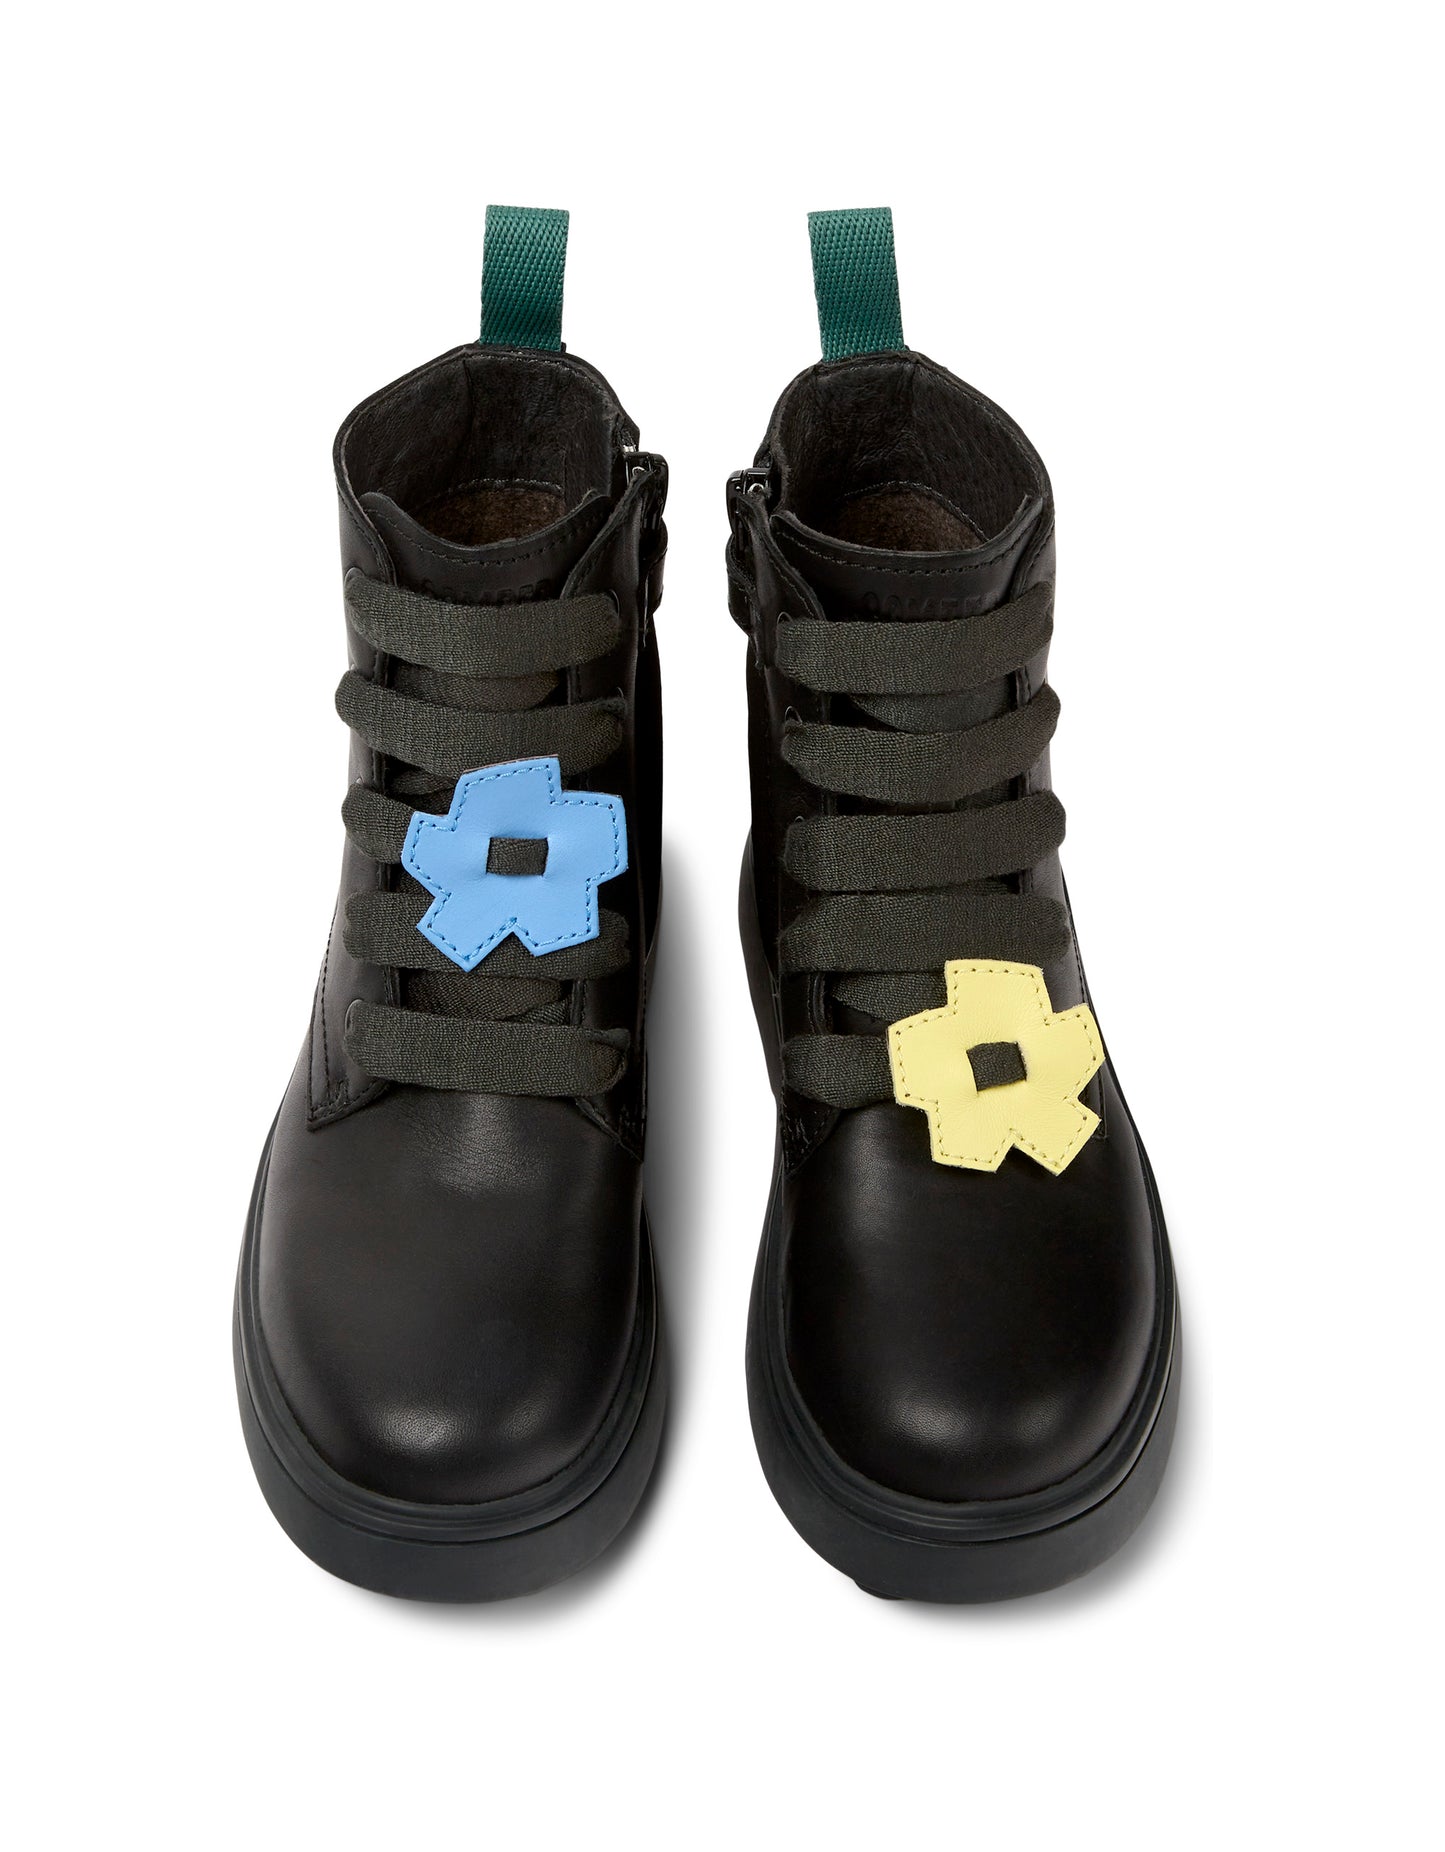 A girls chunky ankle boot by Camper, style K900150-012,in black leather with zip and lace fastening showing flowers on laces. Above view.